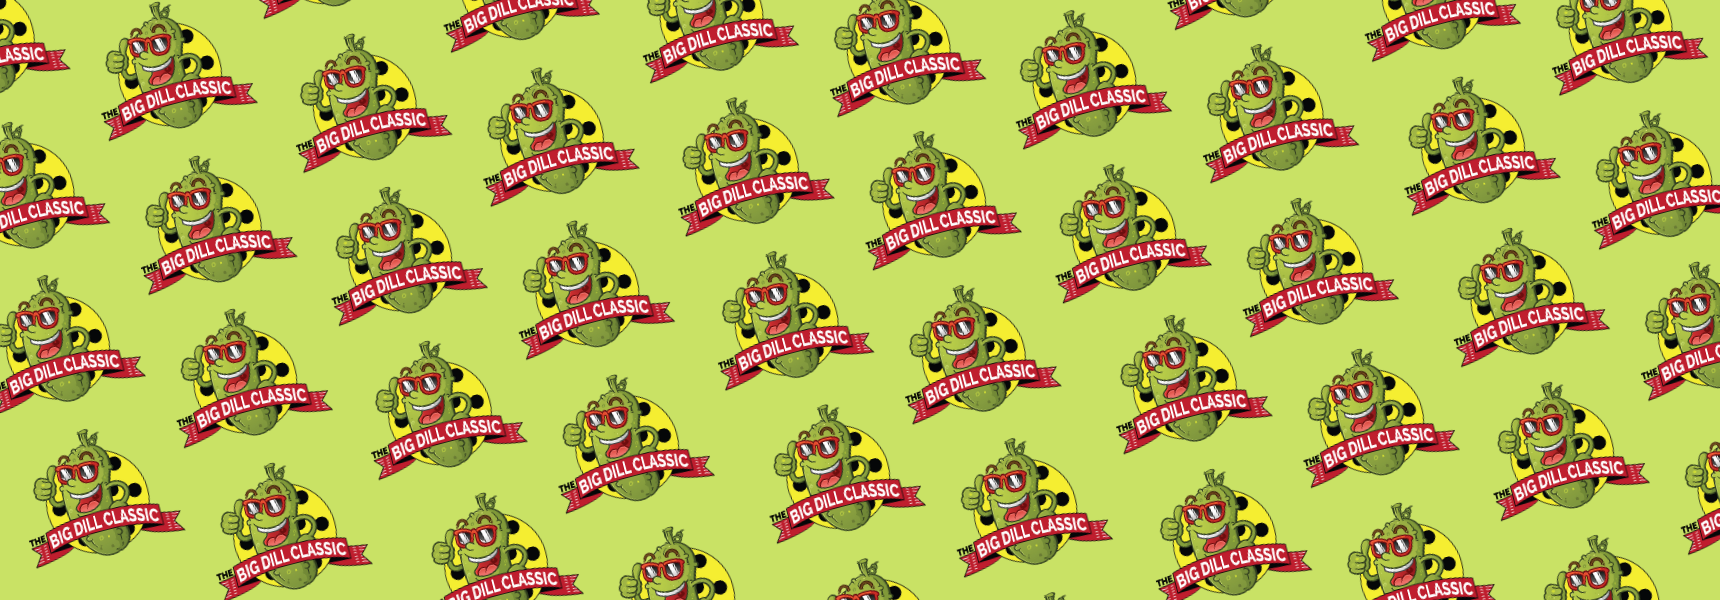 Graphic background with repeating Big Dill Classic logo